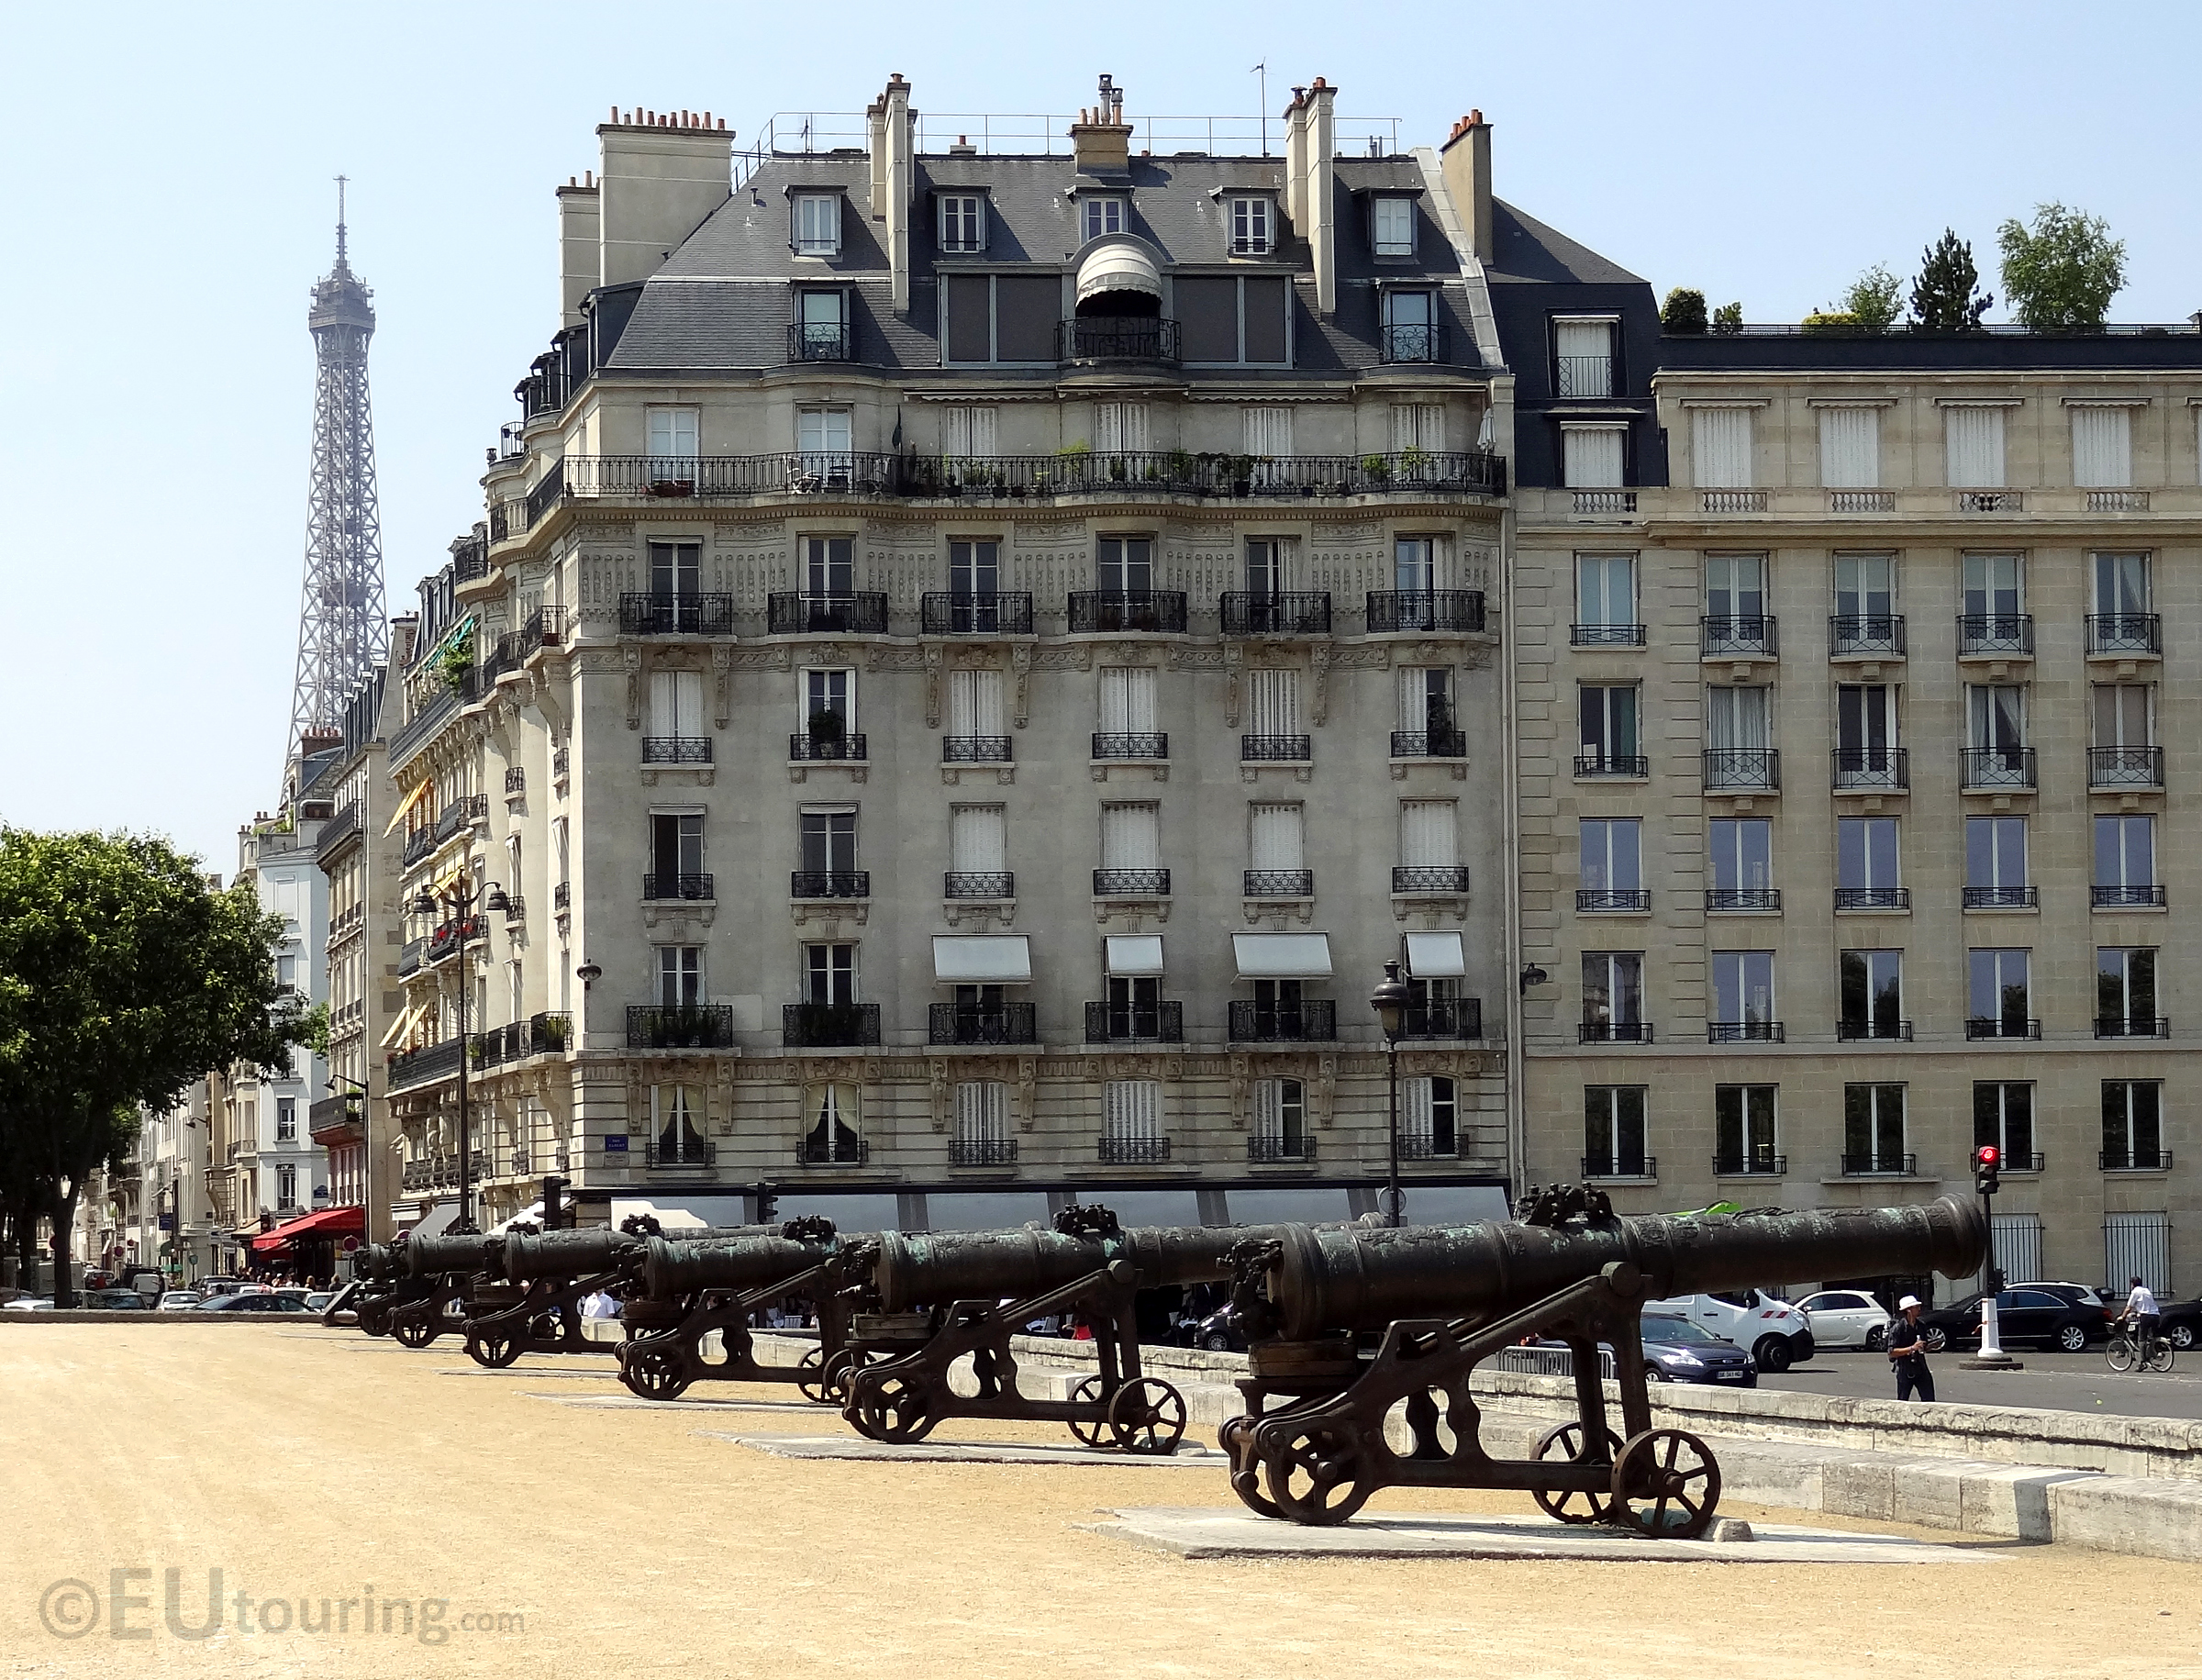 Historical cannons at Les Invalides